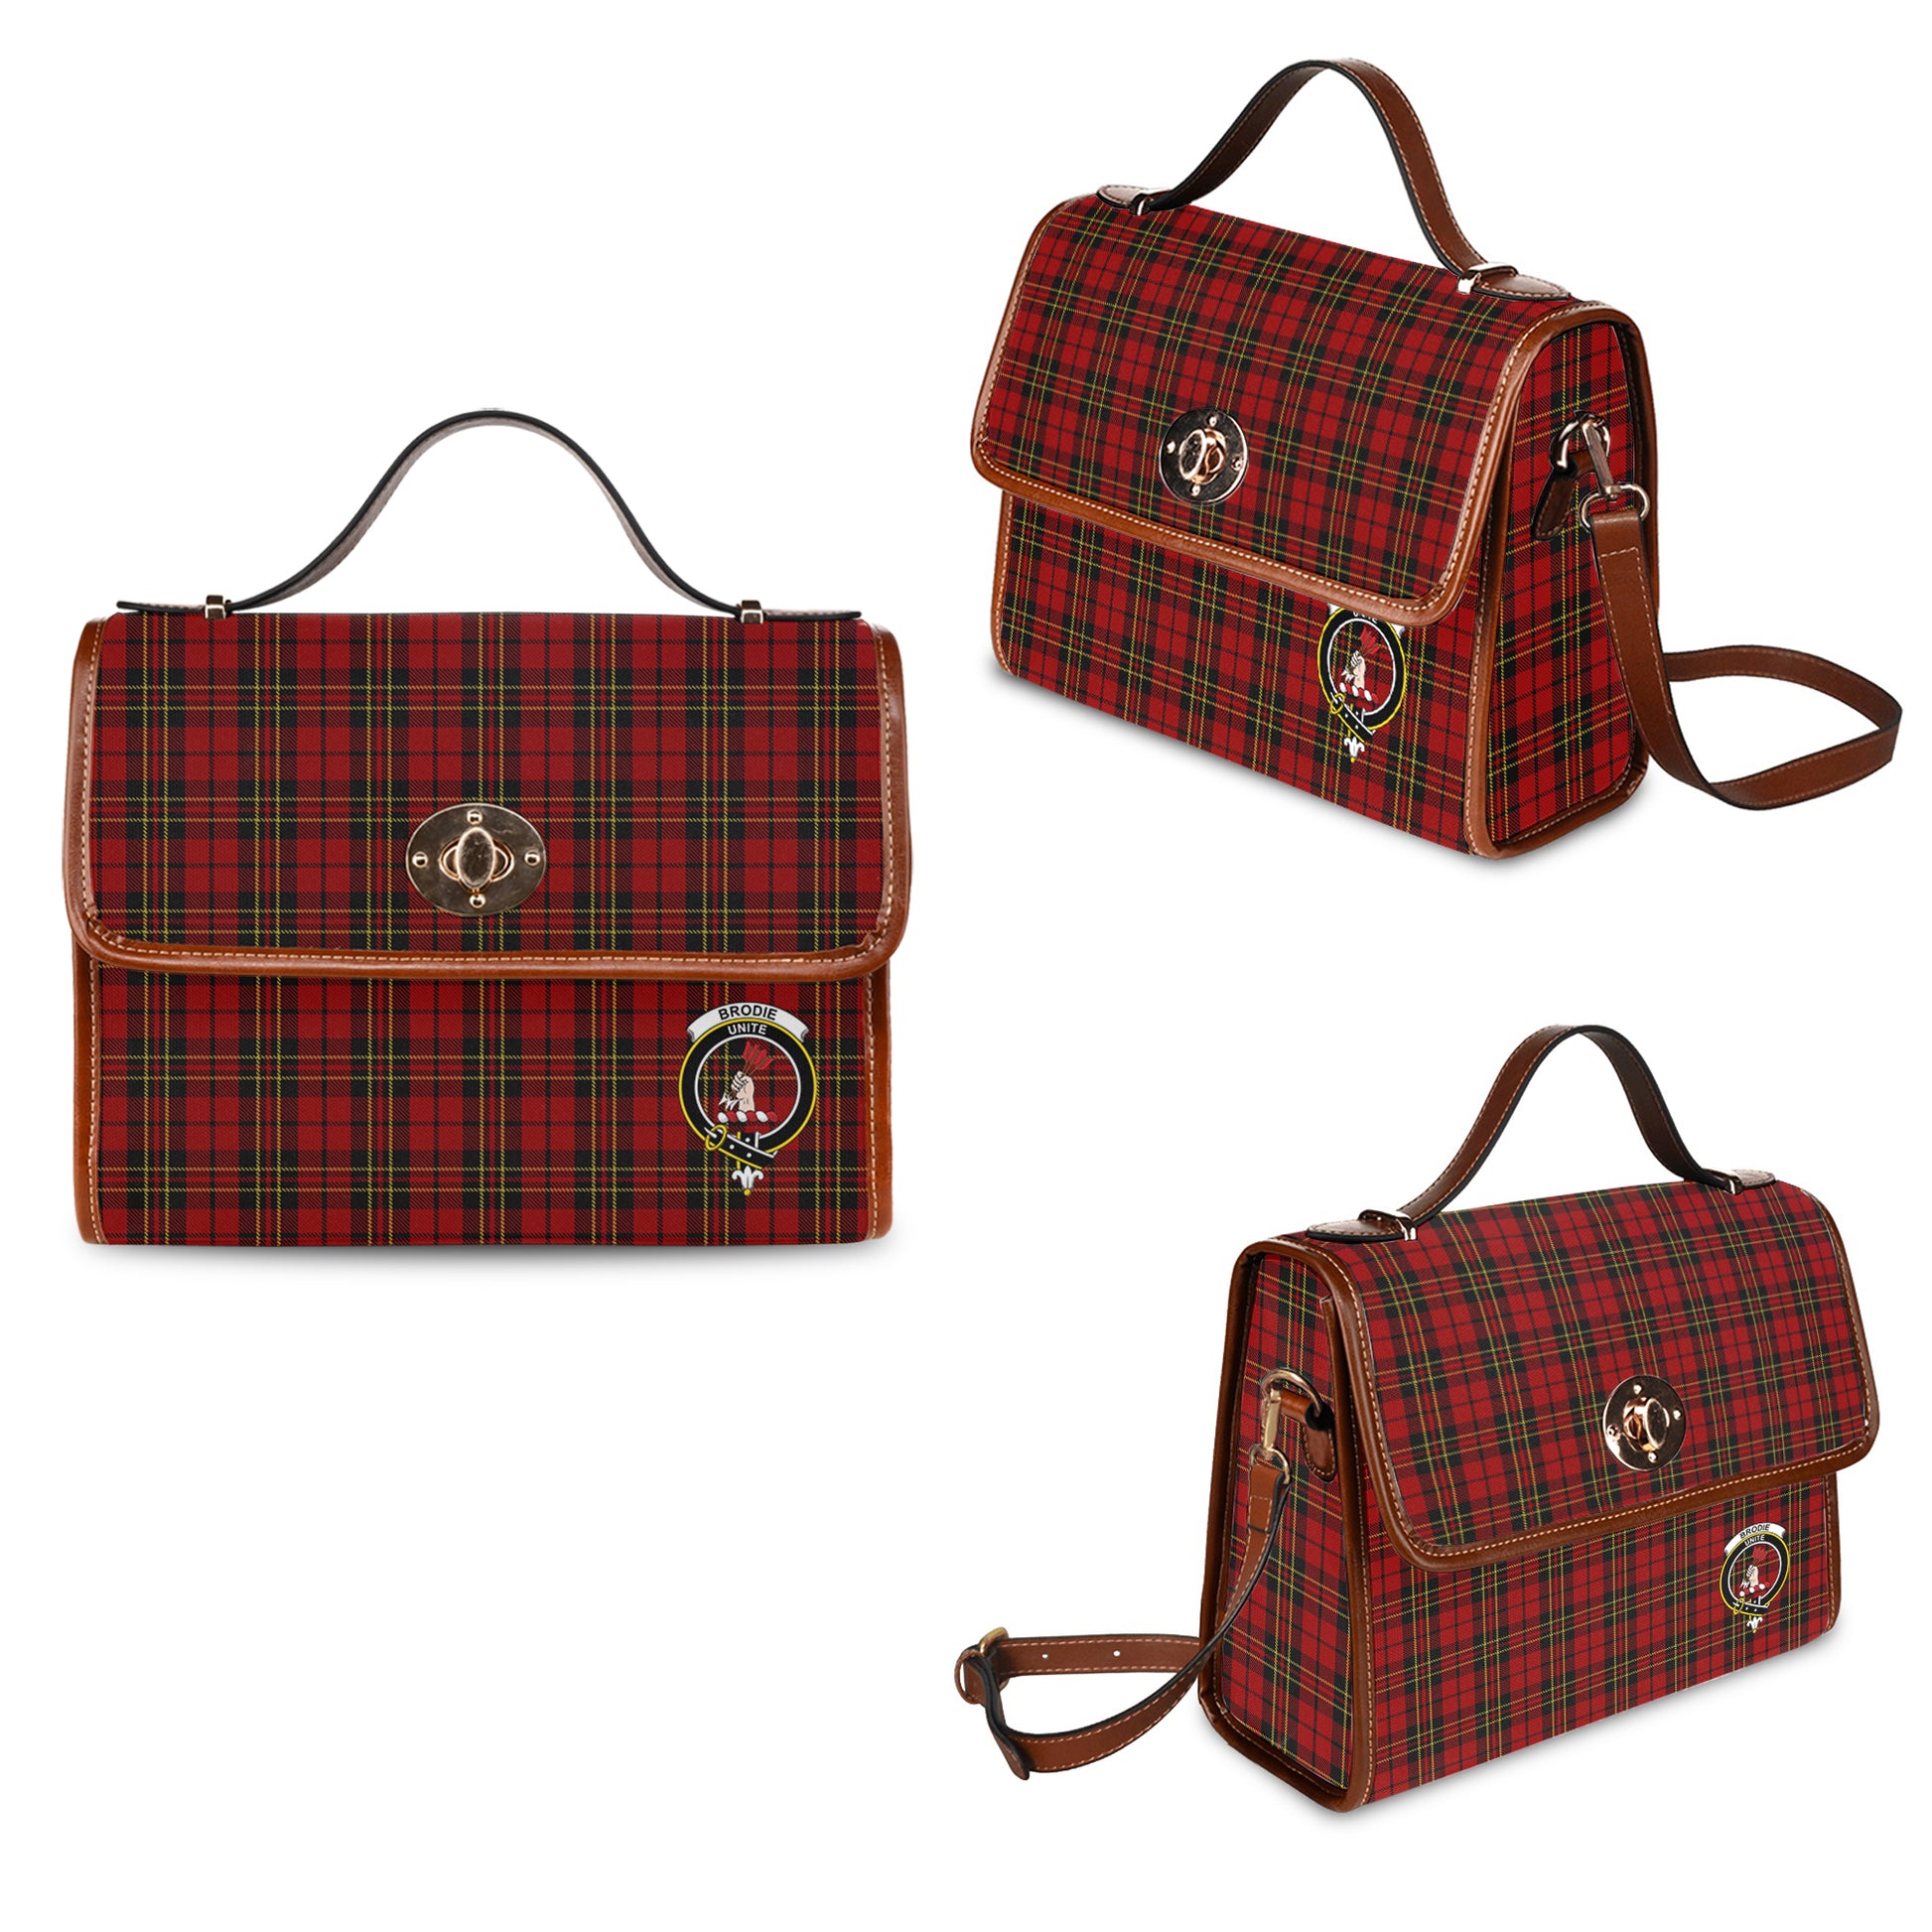 Brodie Tartan Leather Strap Waterproof Canvas Bag with Family Crest One Size 34cm * 42cm (13.4" x 16.5") - Tartanvibesclothing